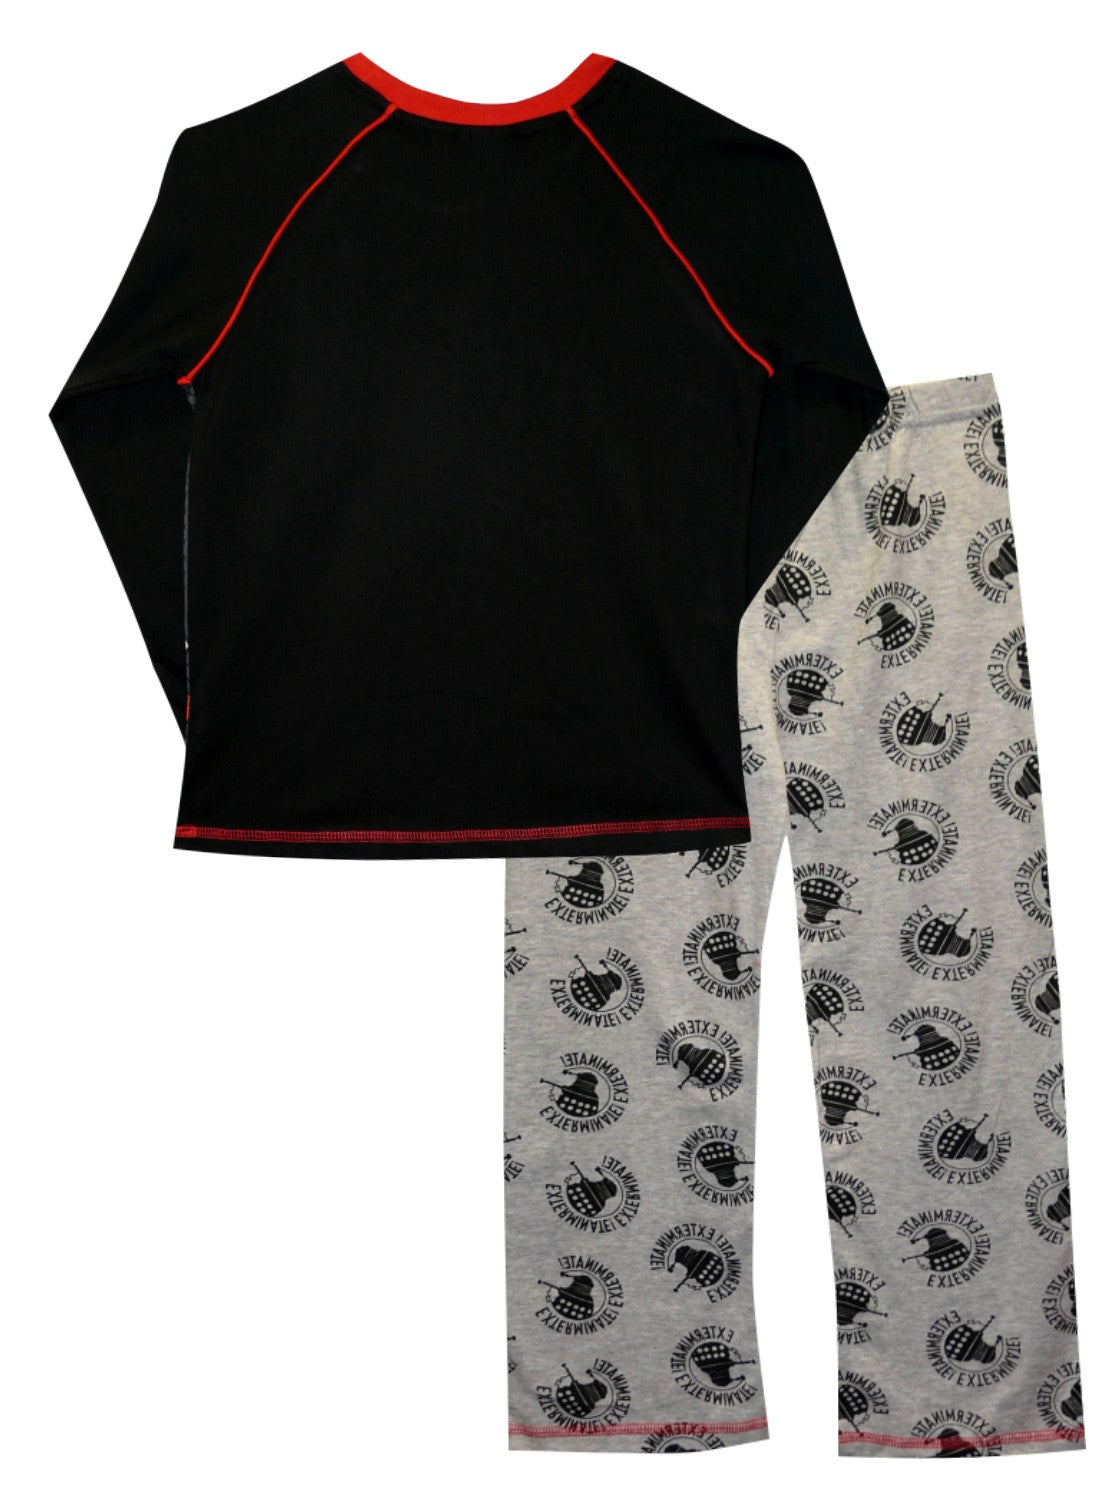 Doctor Who Boys Pyjamas ages 4-6 Years available EXCLUSIVE DESIGN